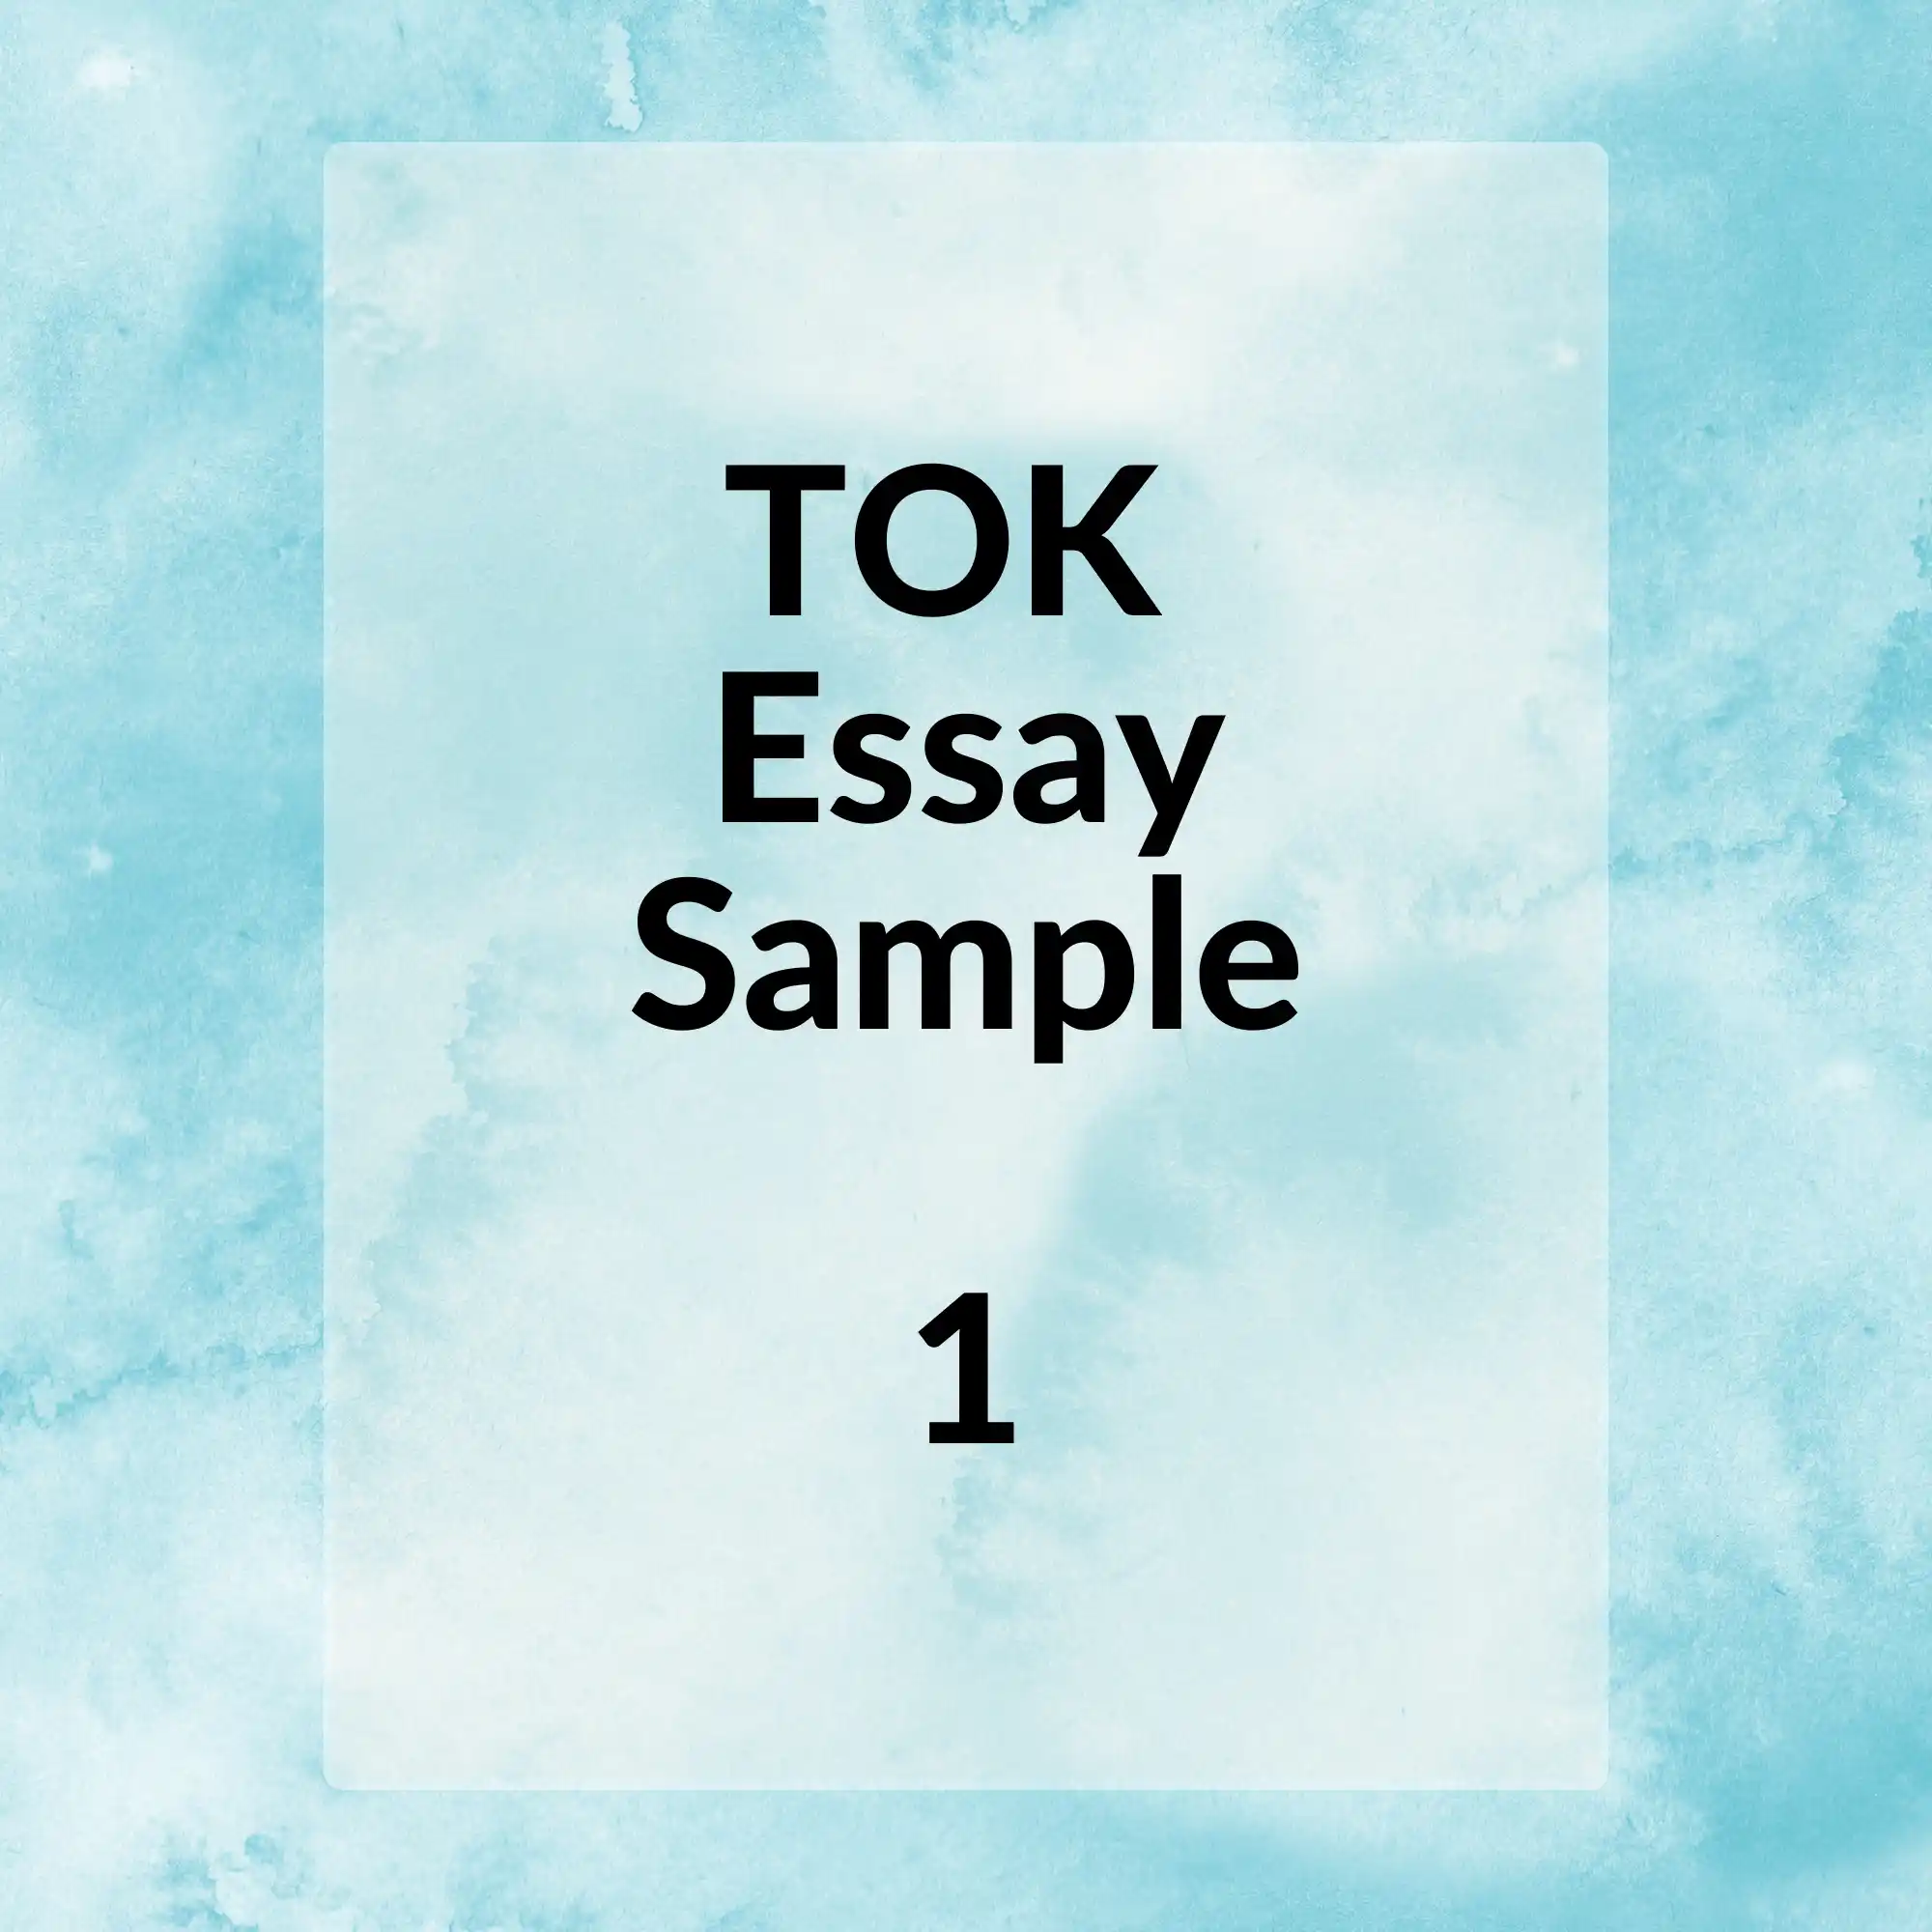 A square image with a watercolor background in shades of blue, featuring a white central rectangle that reads "TOK Essay Sample 1" in black font.